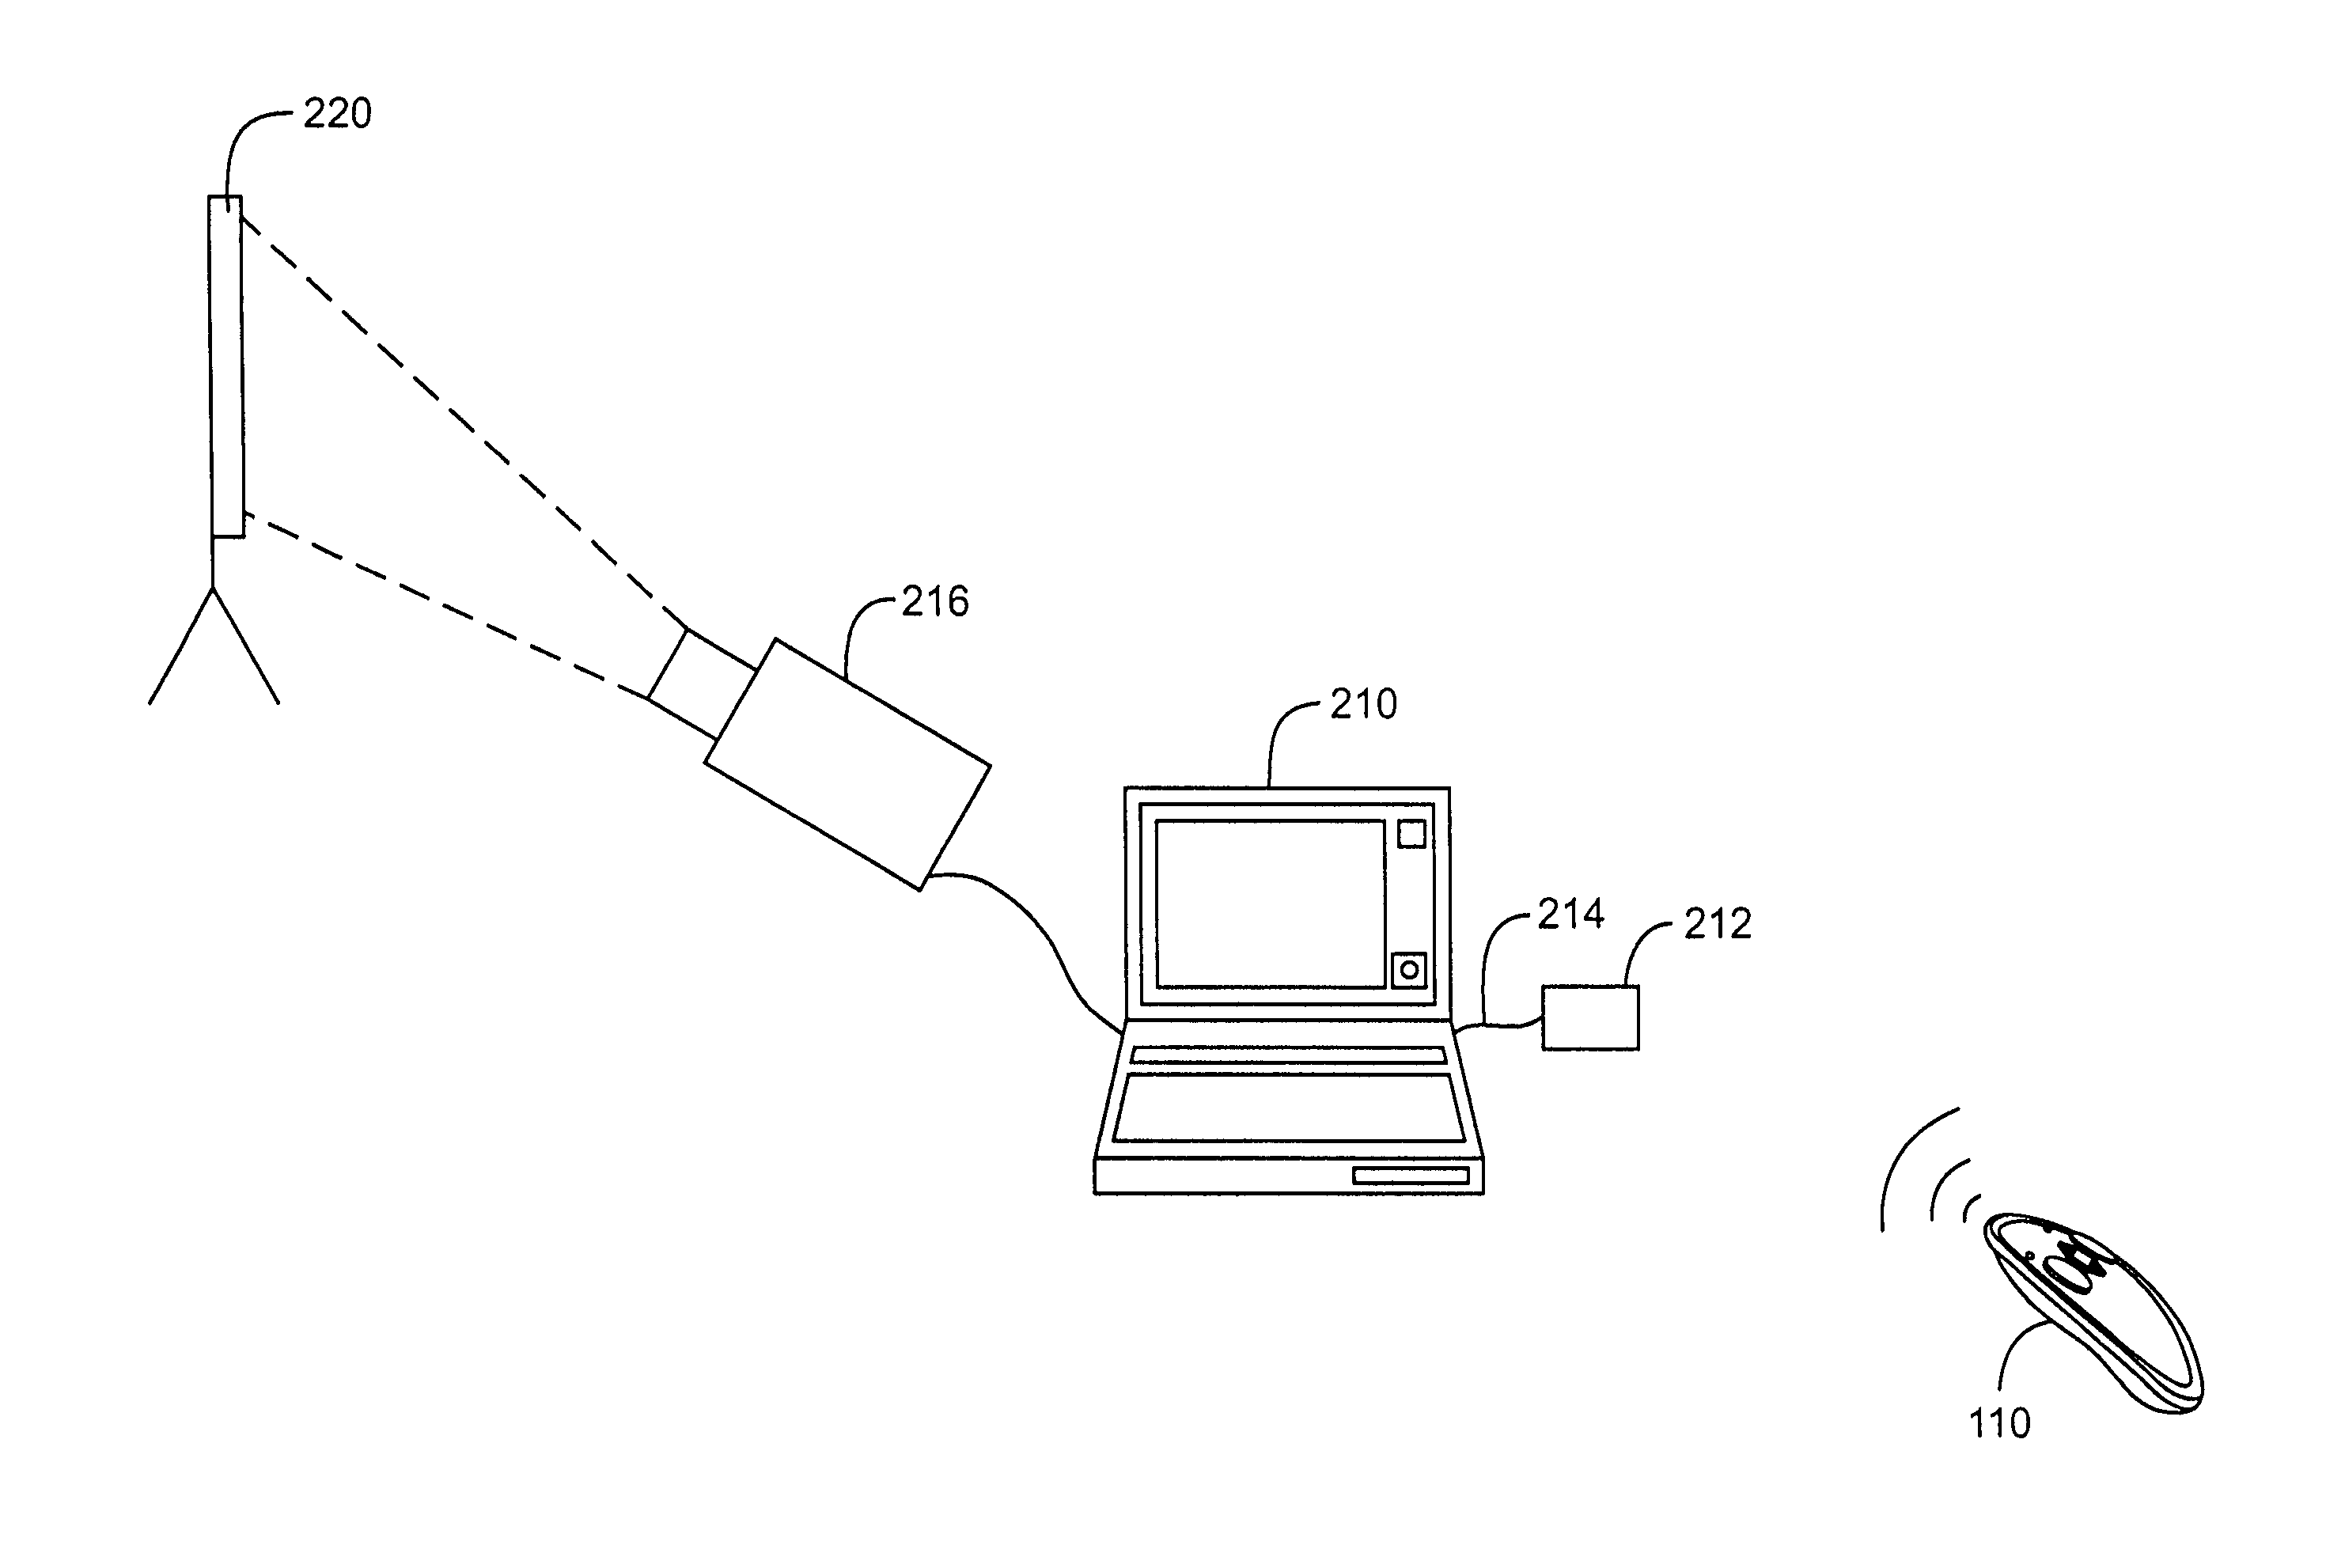 Hybrid presentation controller and computer input device